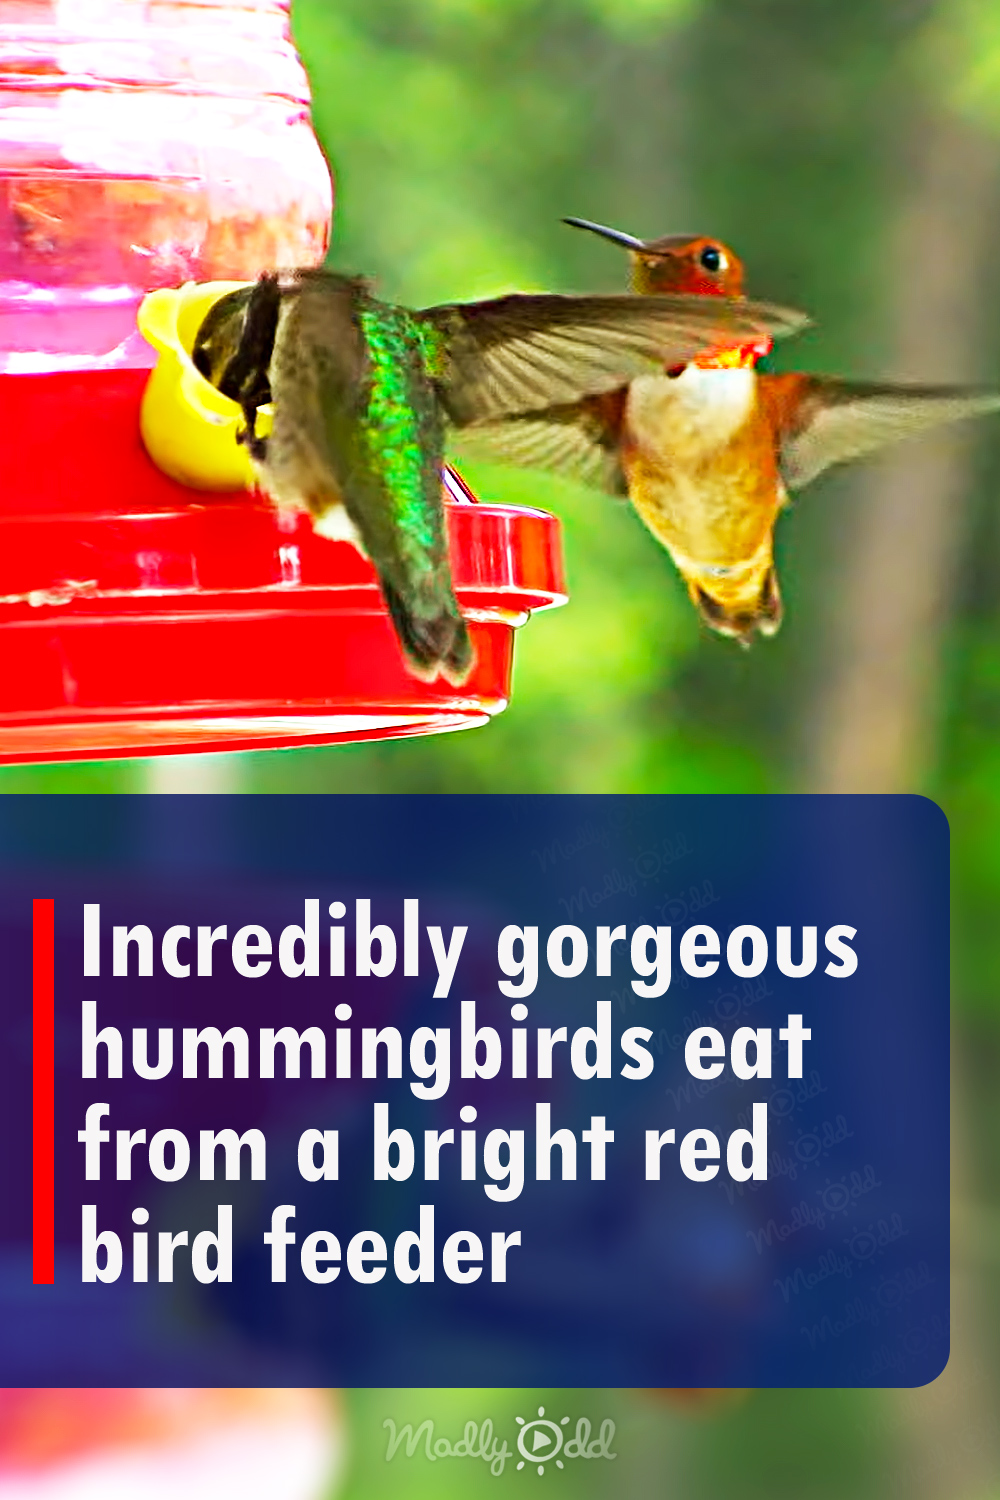 Incredibly gorgeous hummingbirds eat from a bright red bird feeder